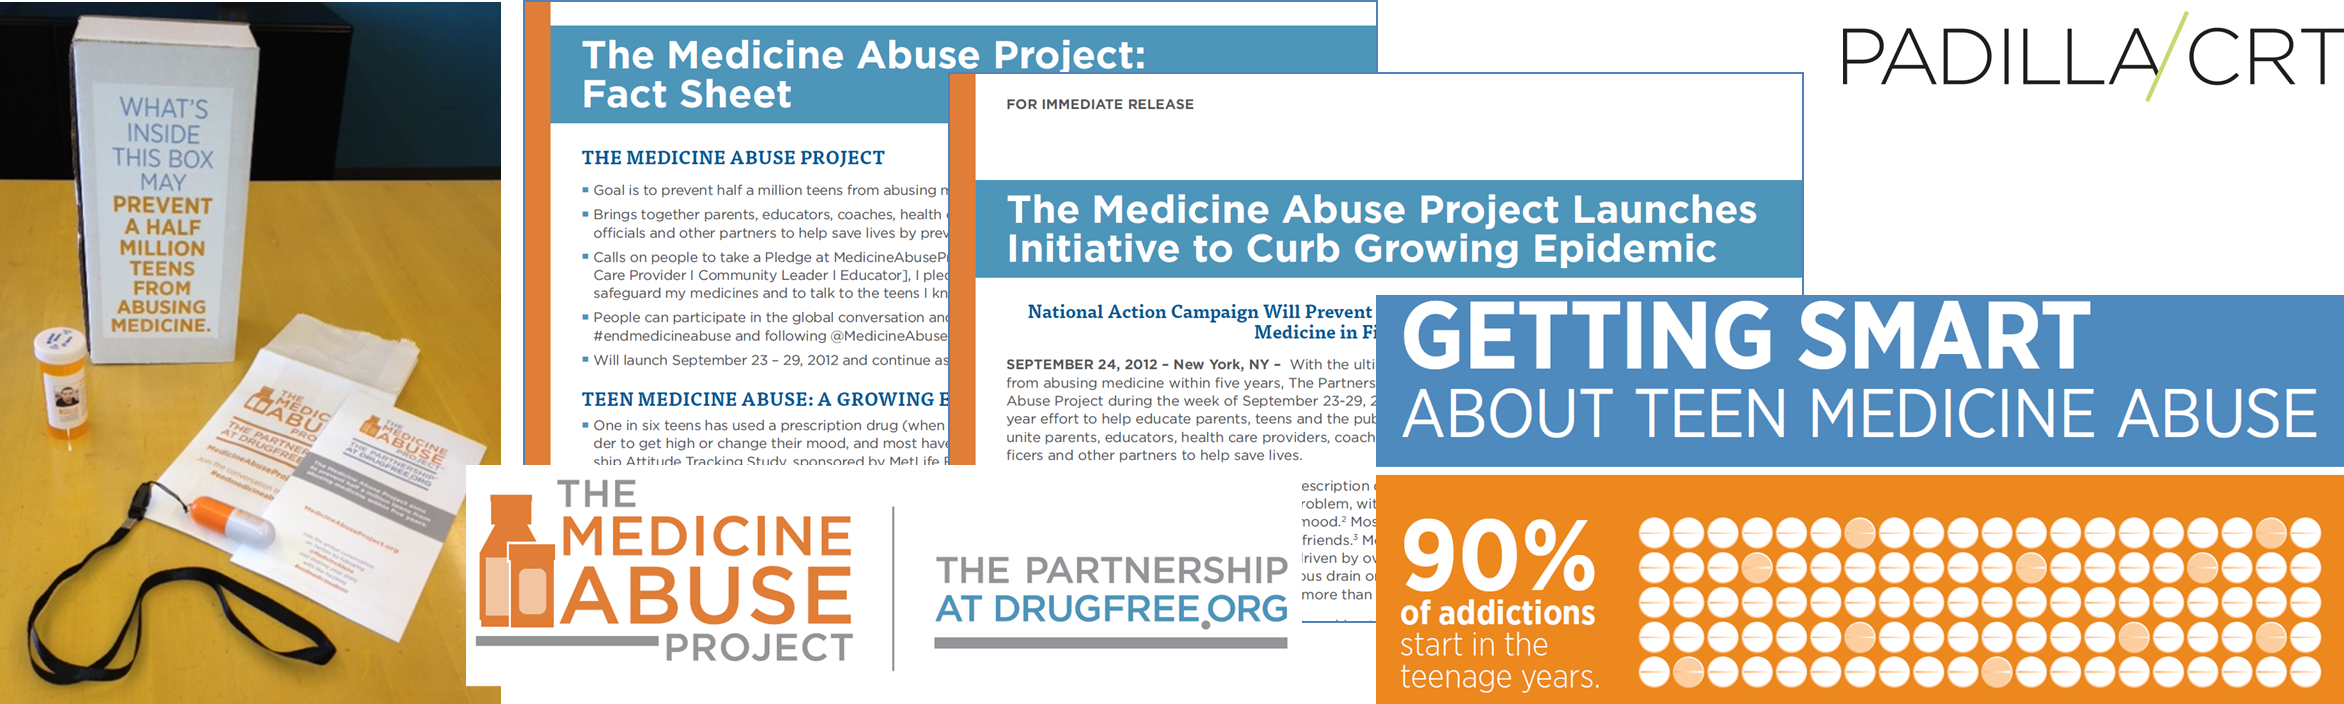 The Medicine Abuse Project: Preventing Half a Million Teens from Abusing Medicine by 2017 - Logo - https://s39939.pcdn.co/wp-content/uploads/2018/11/MAP-Banner.png